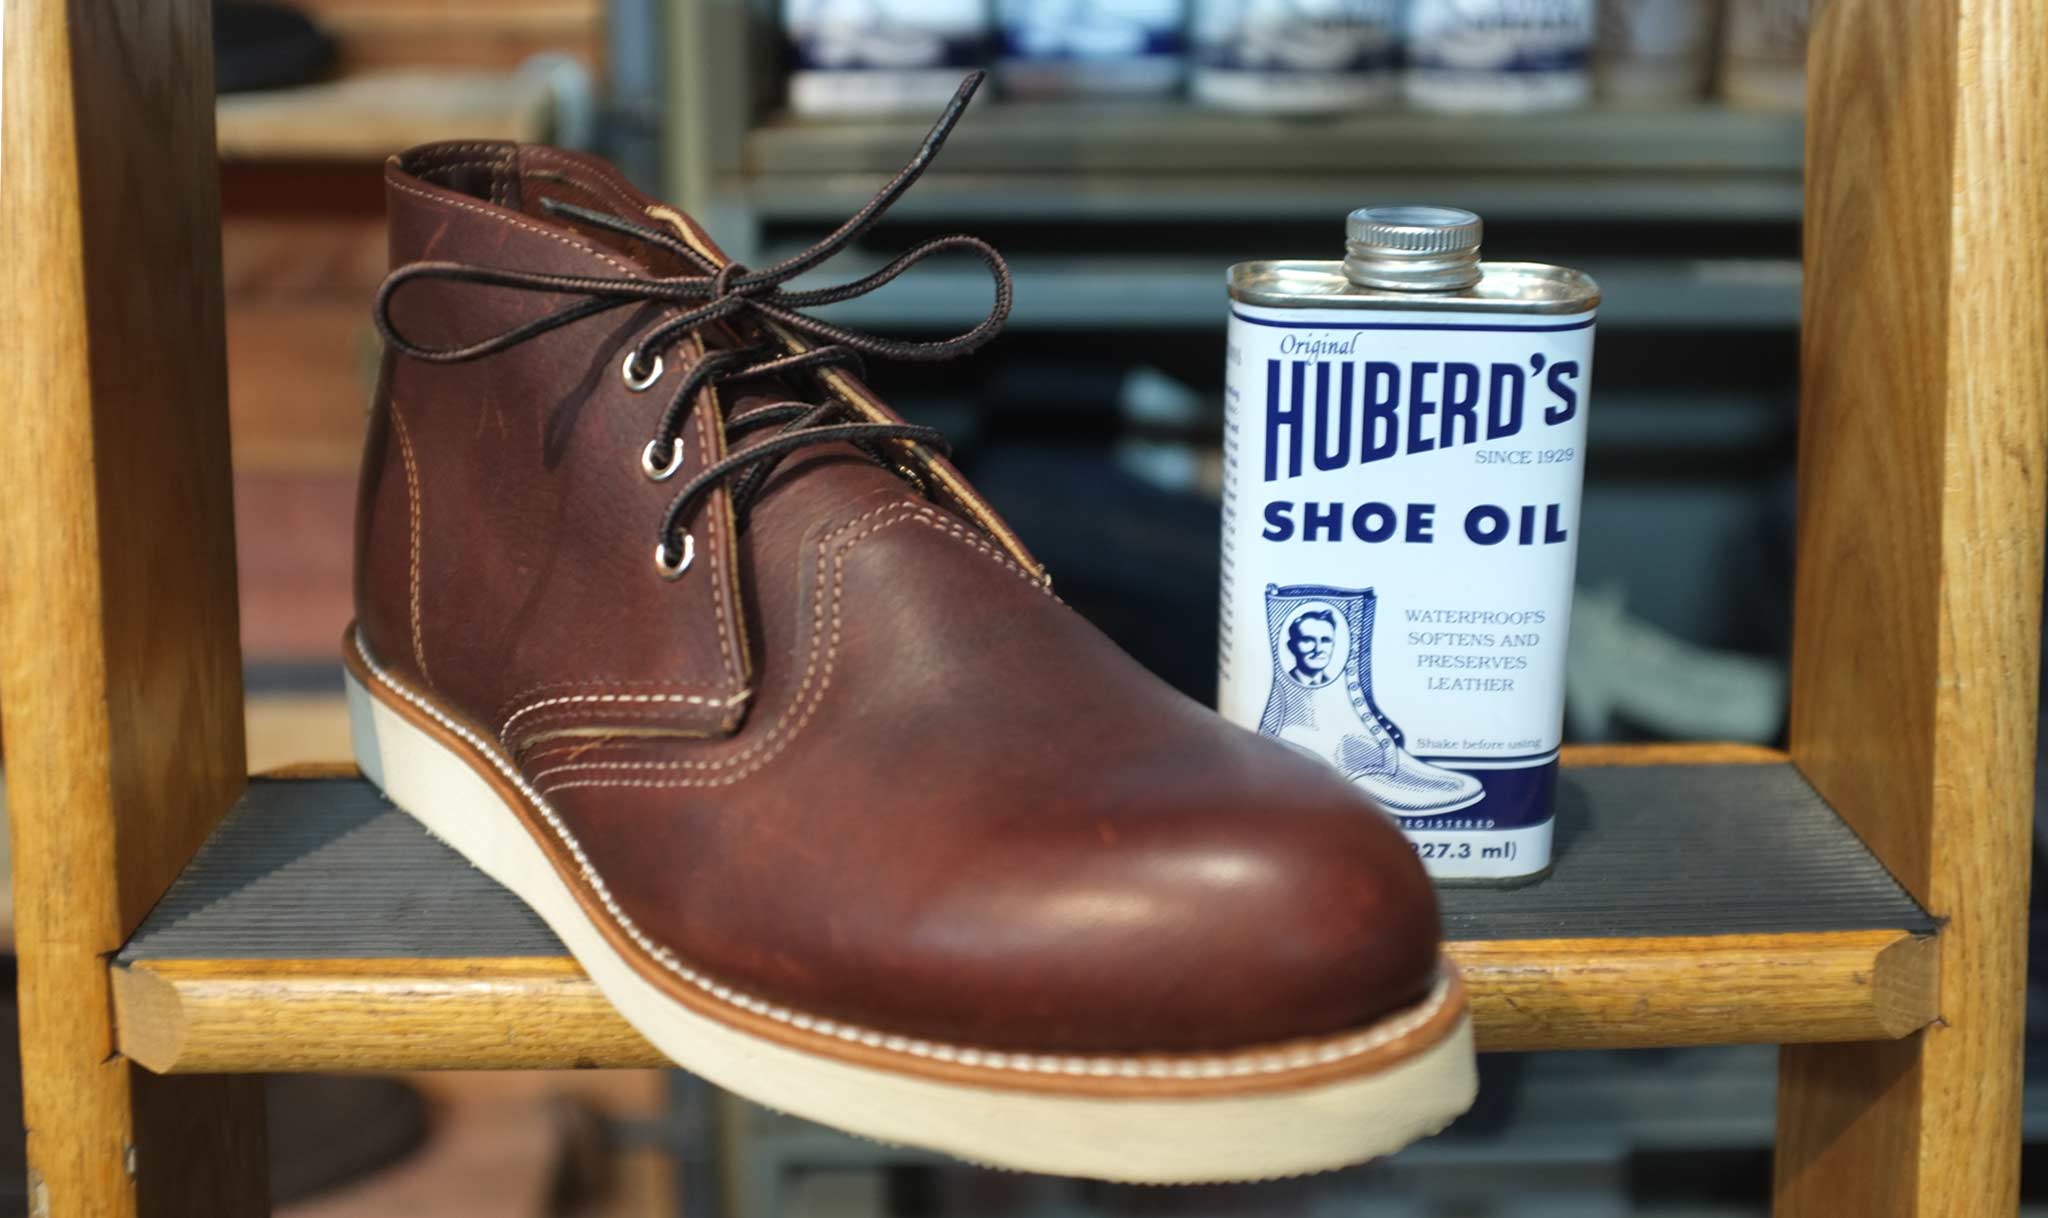 Red Wing Shoe Company: Oil-Tanned and Goodyear Welted